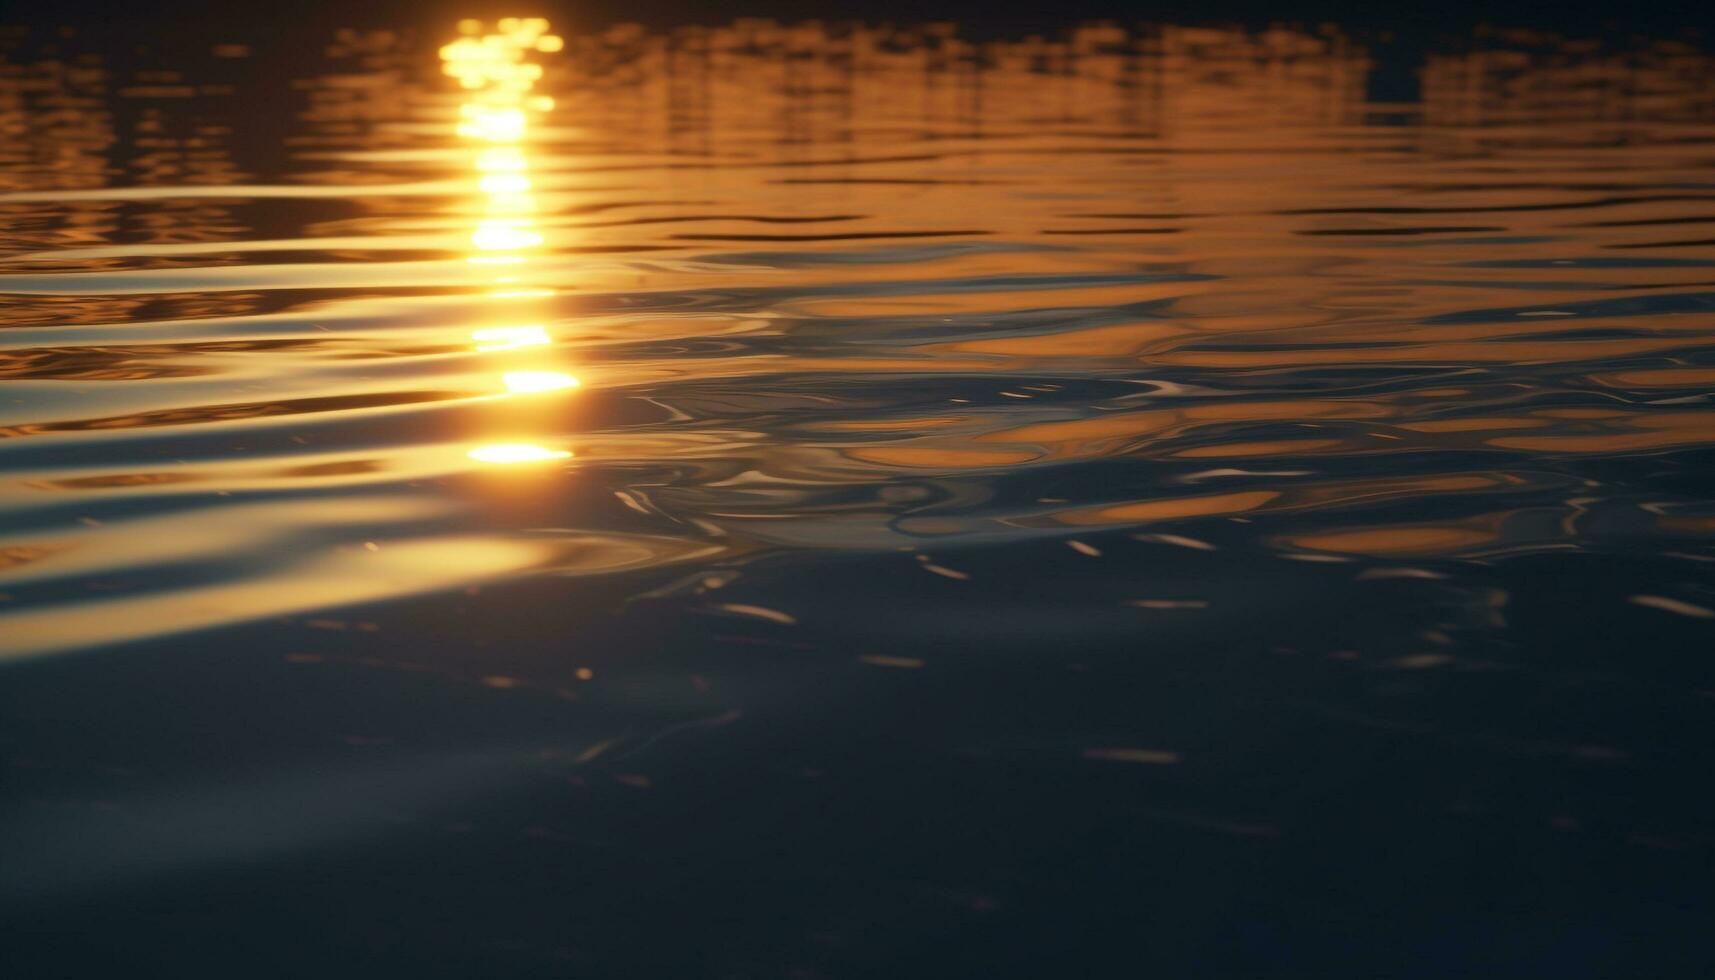 Nature sunset reflection on water creates a tranquil, vibrant scene generated by AI photo